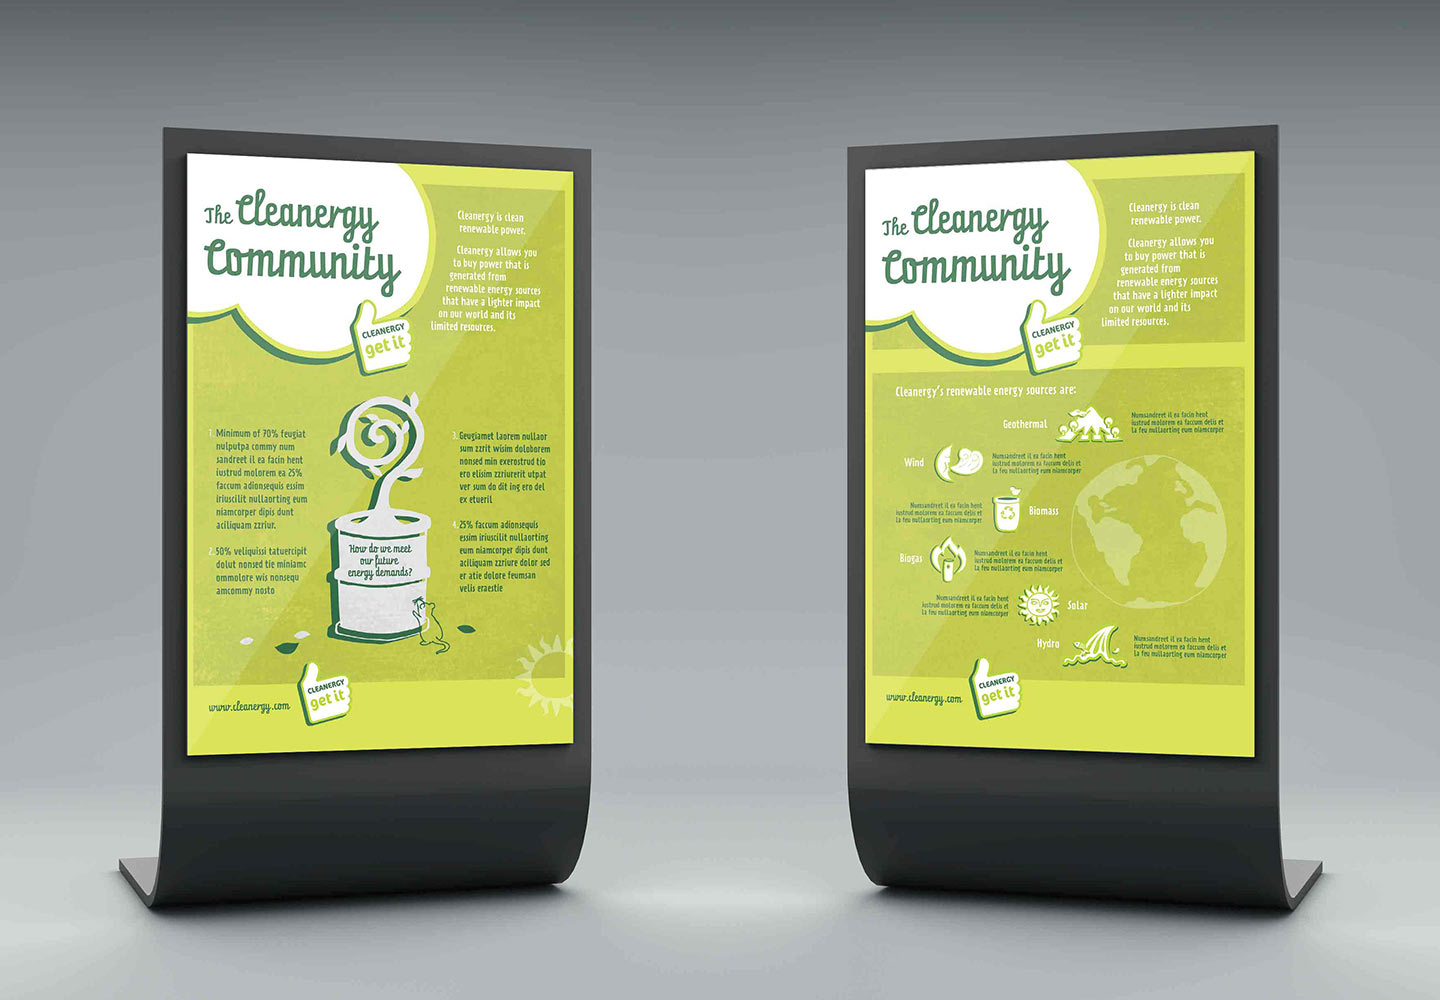 Brand Consultancy in Energy Industry. Poster for Cleanergy.